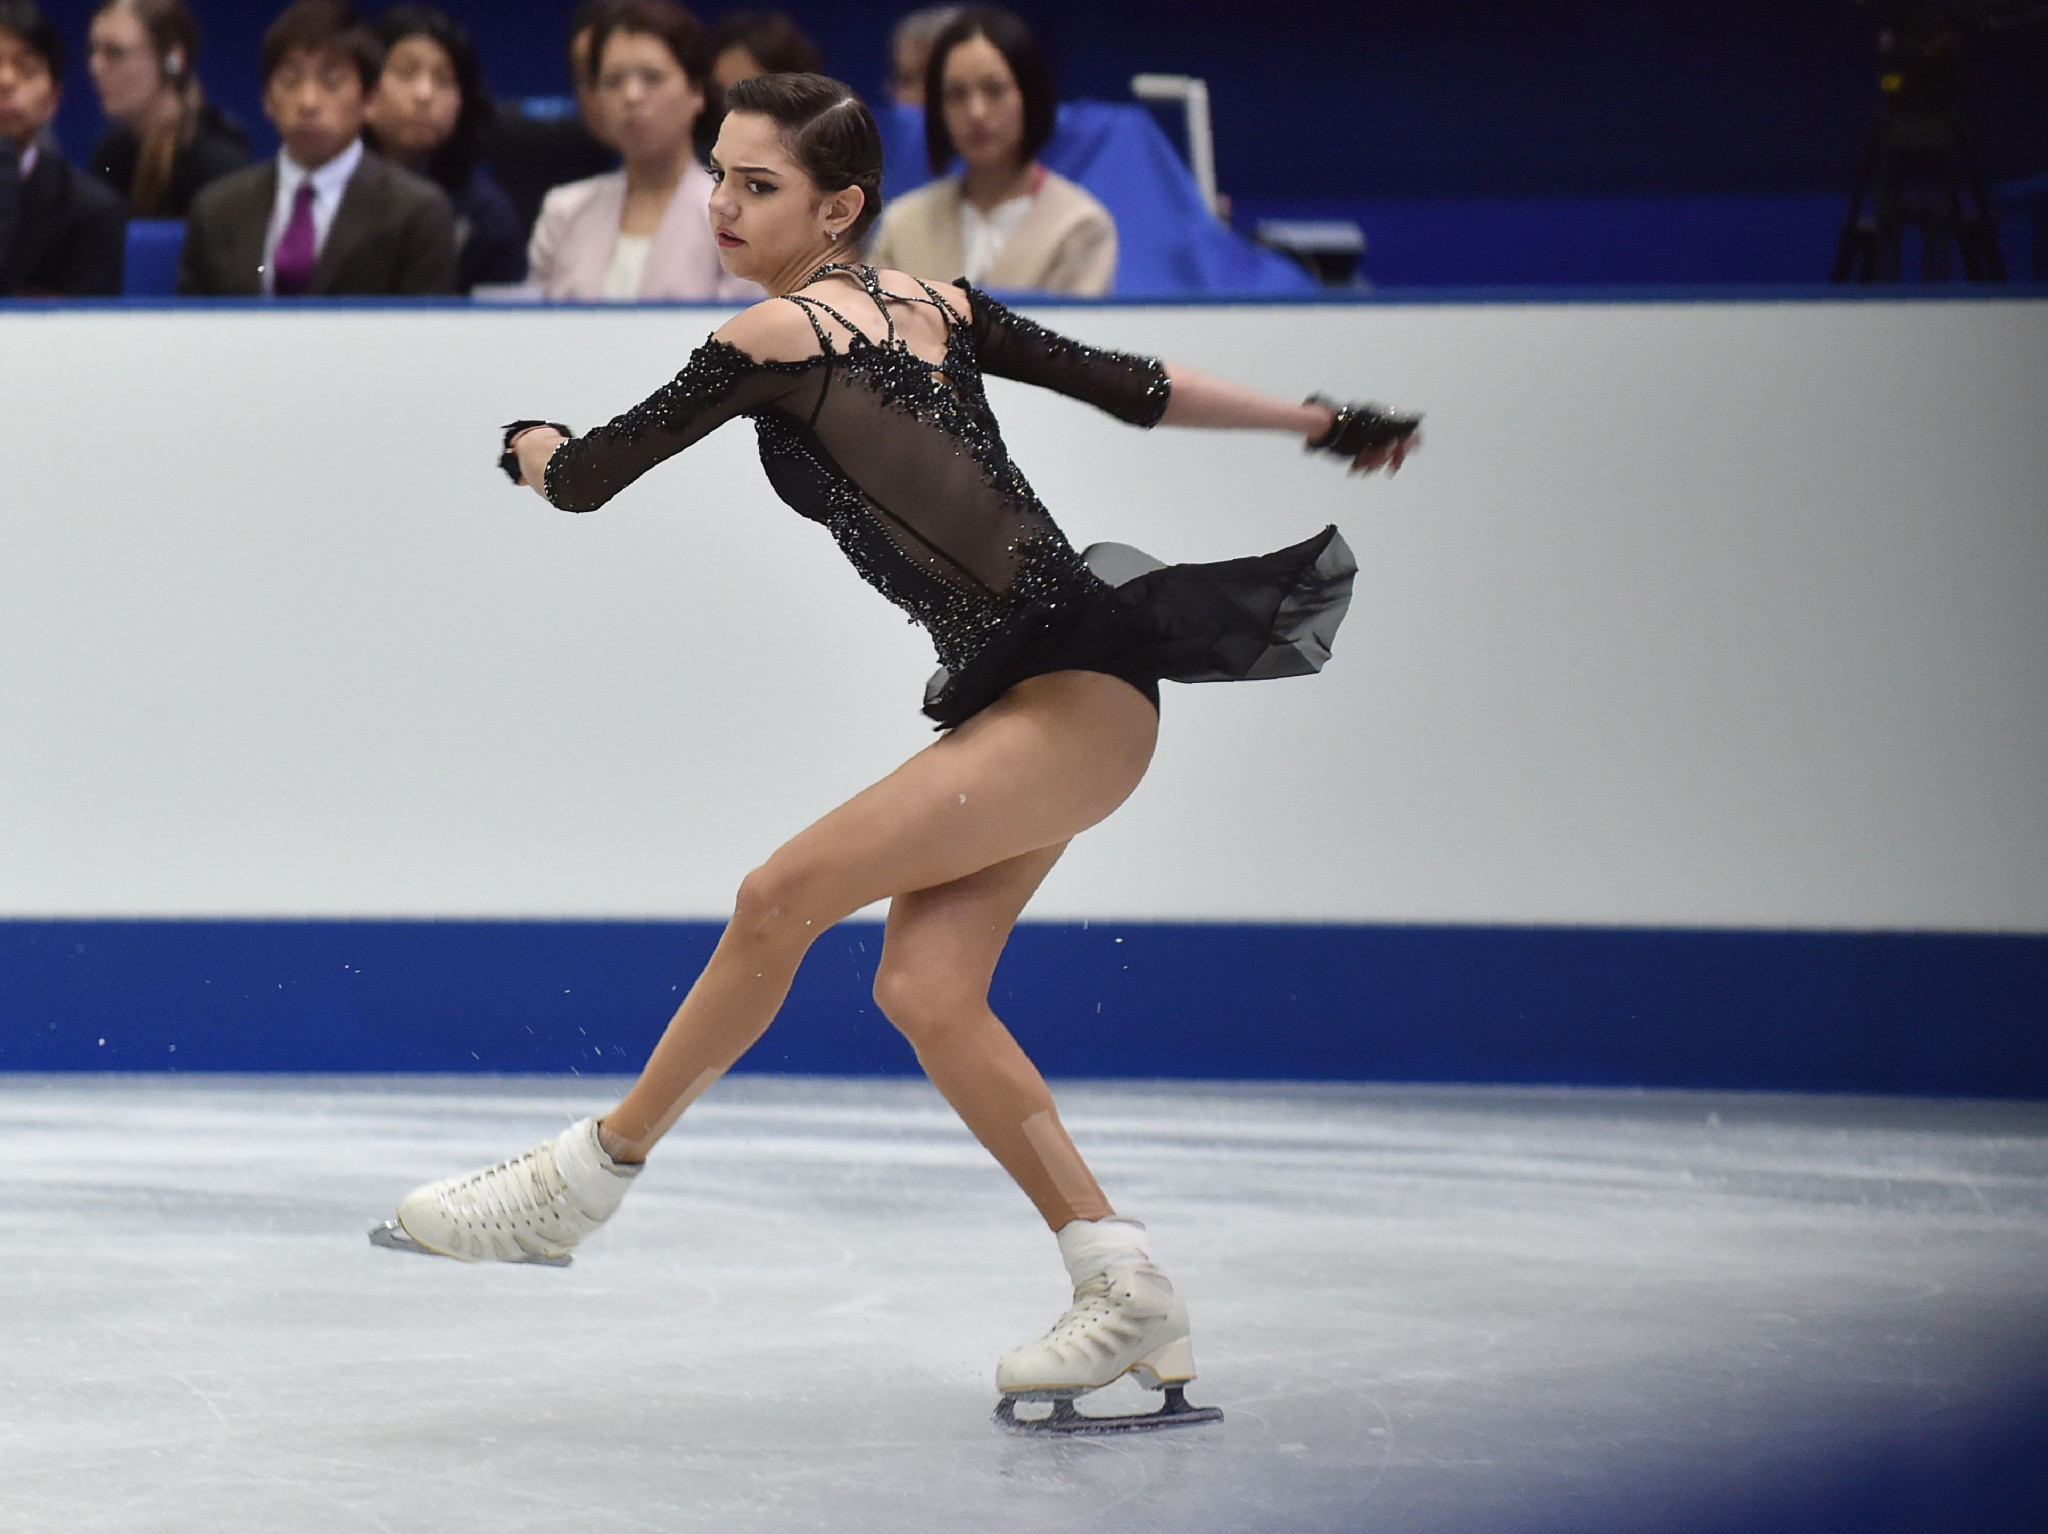 Evgenia Medvedeva will form part of the Russian delegation speaking to the IOC Executive Board ©Getty Images